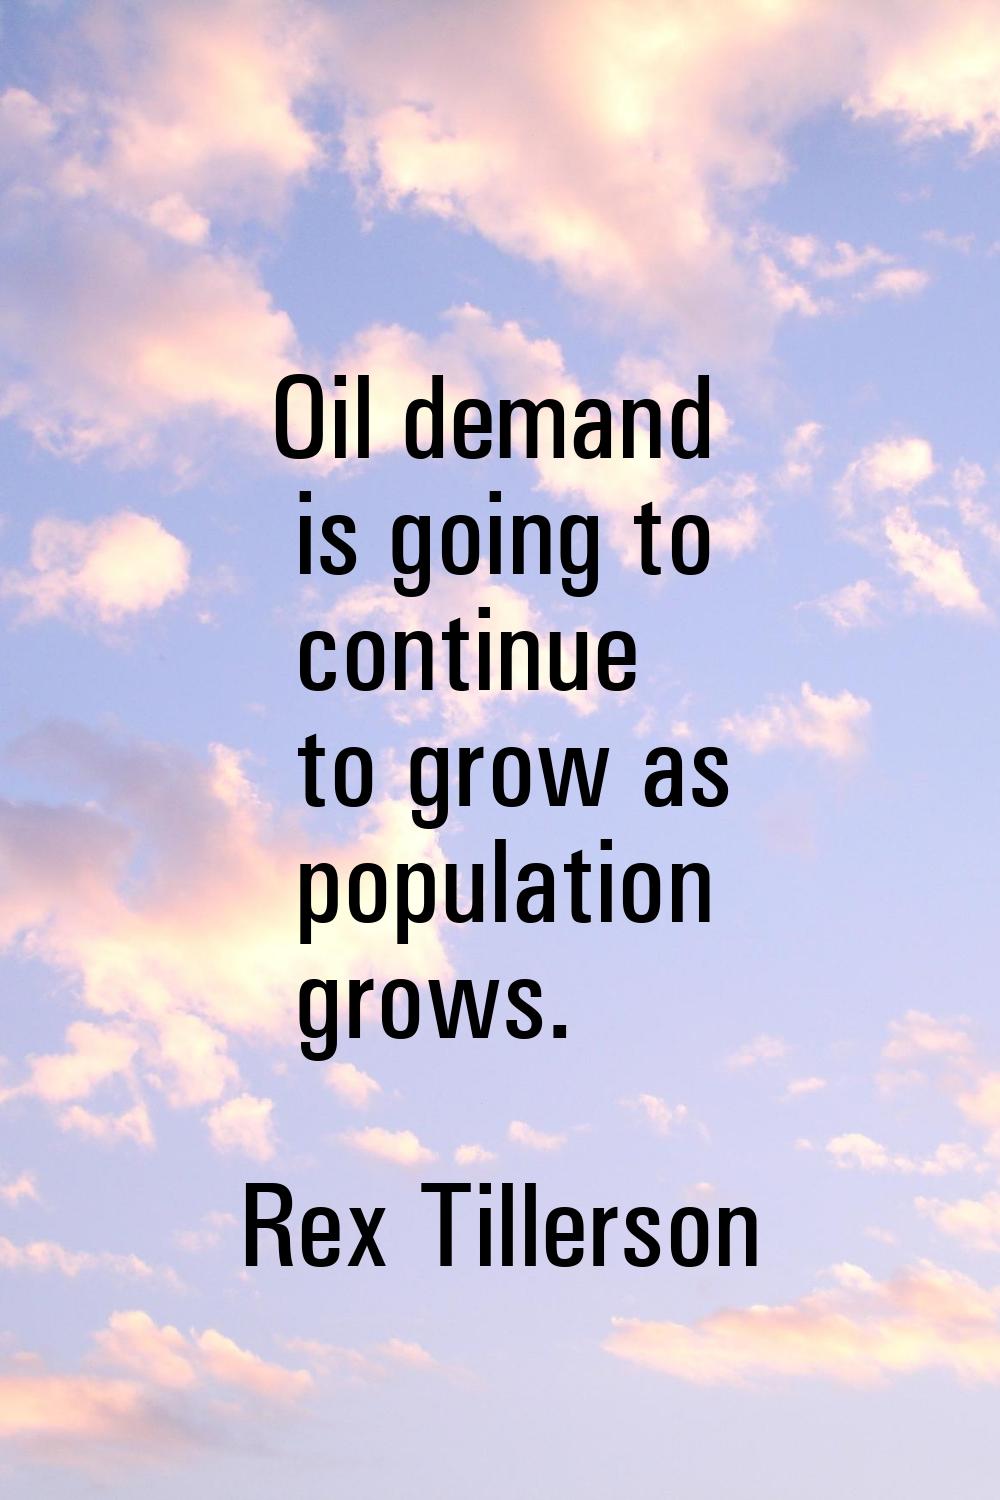 Oil demand is going to continue to grow as population grows.